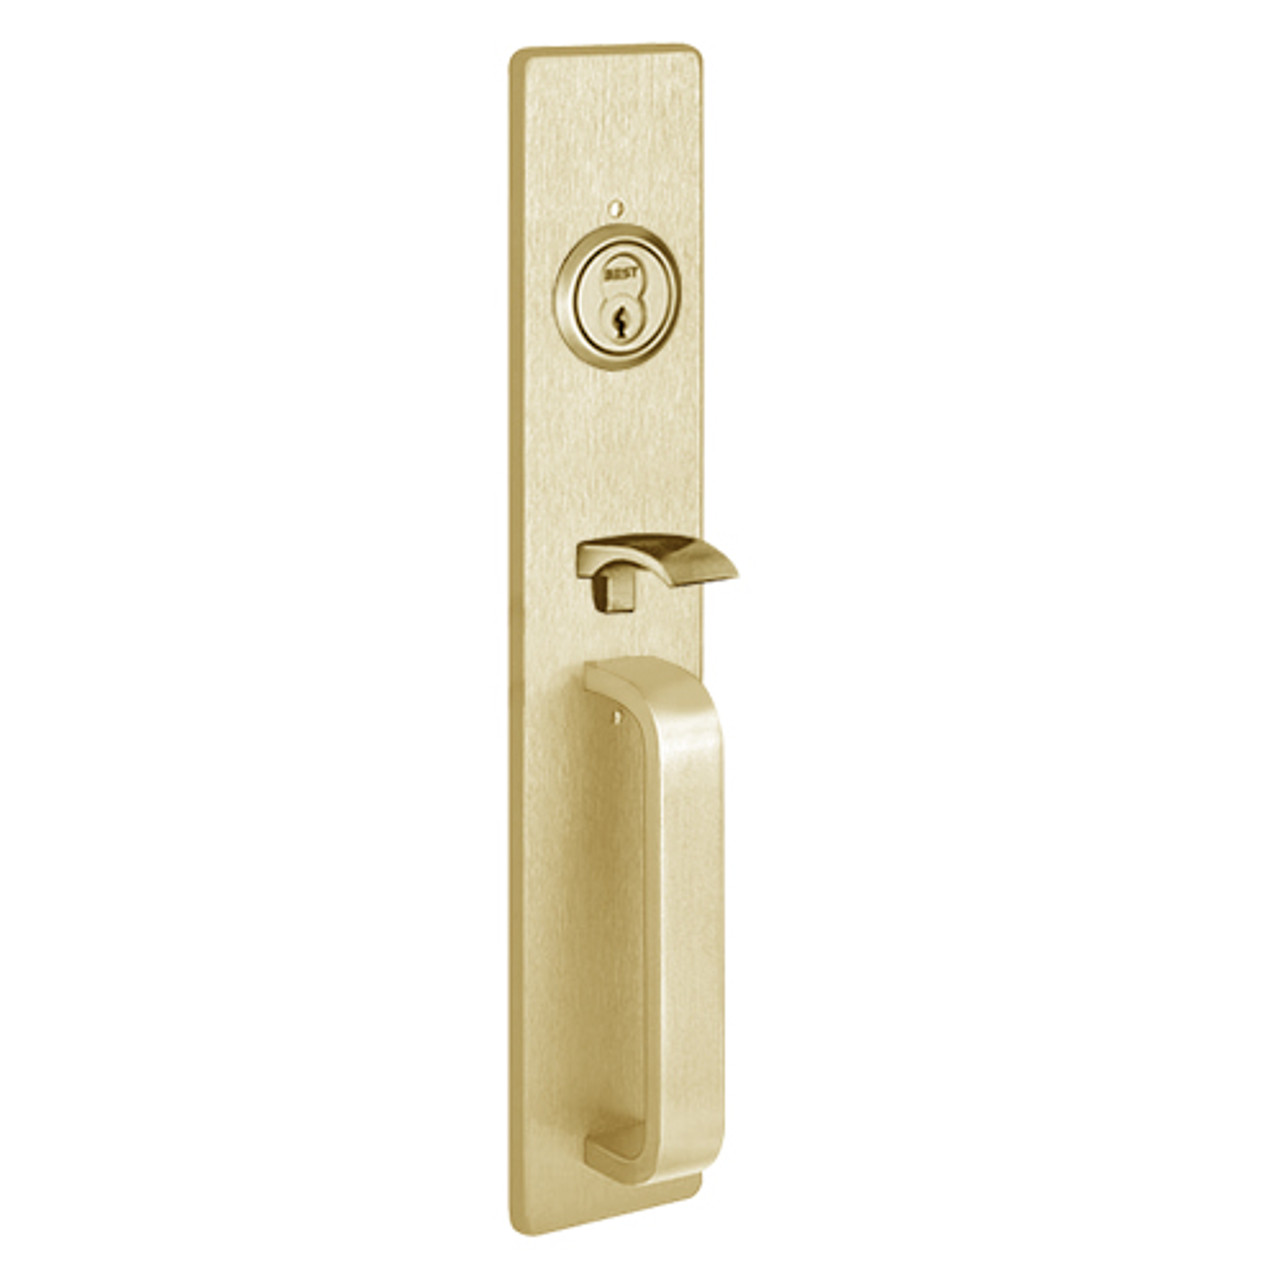 C1715A-606 PHI Thumb Piece Always Active with A Design Pull for Concealed Vertical Rod Device in Satin Brass Finish